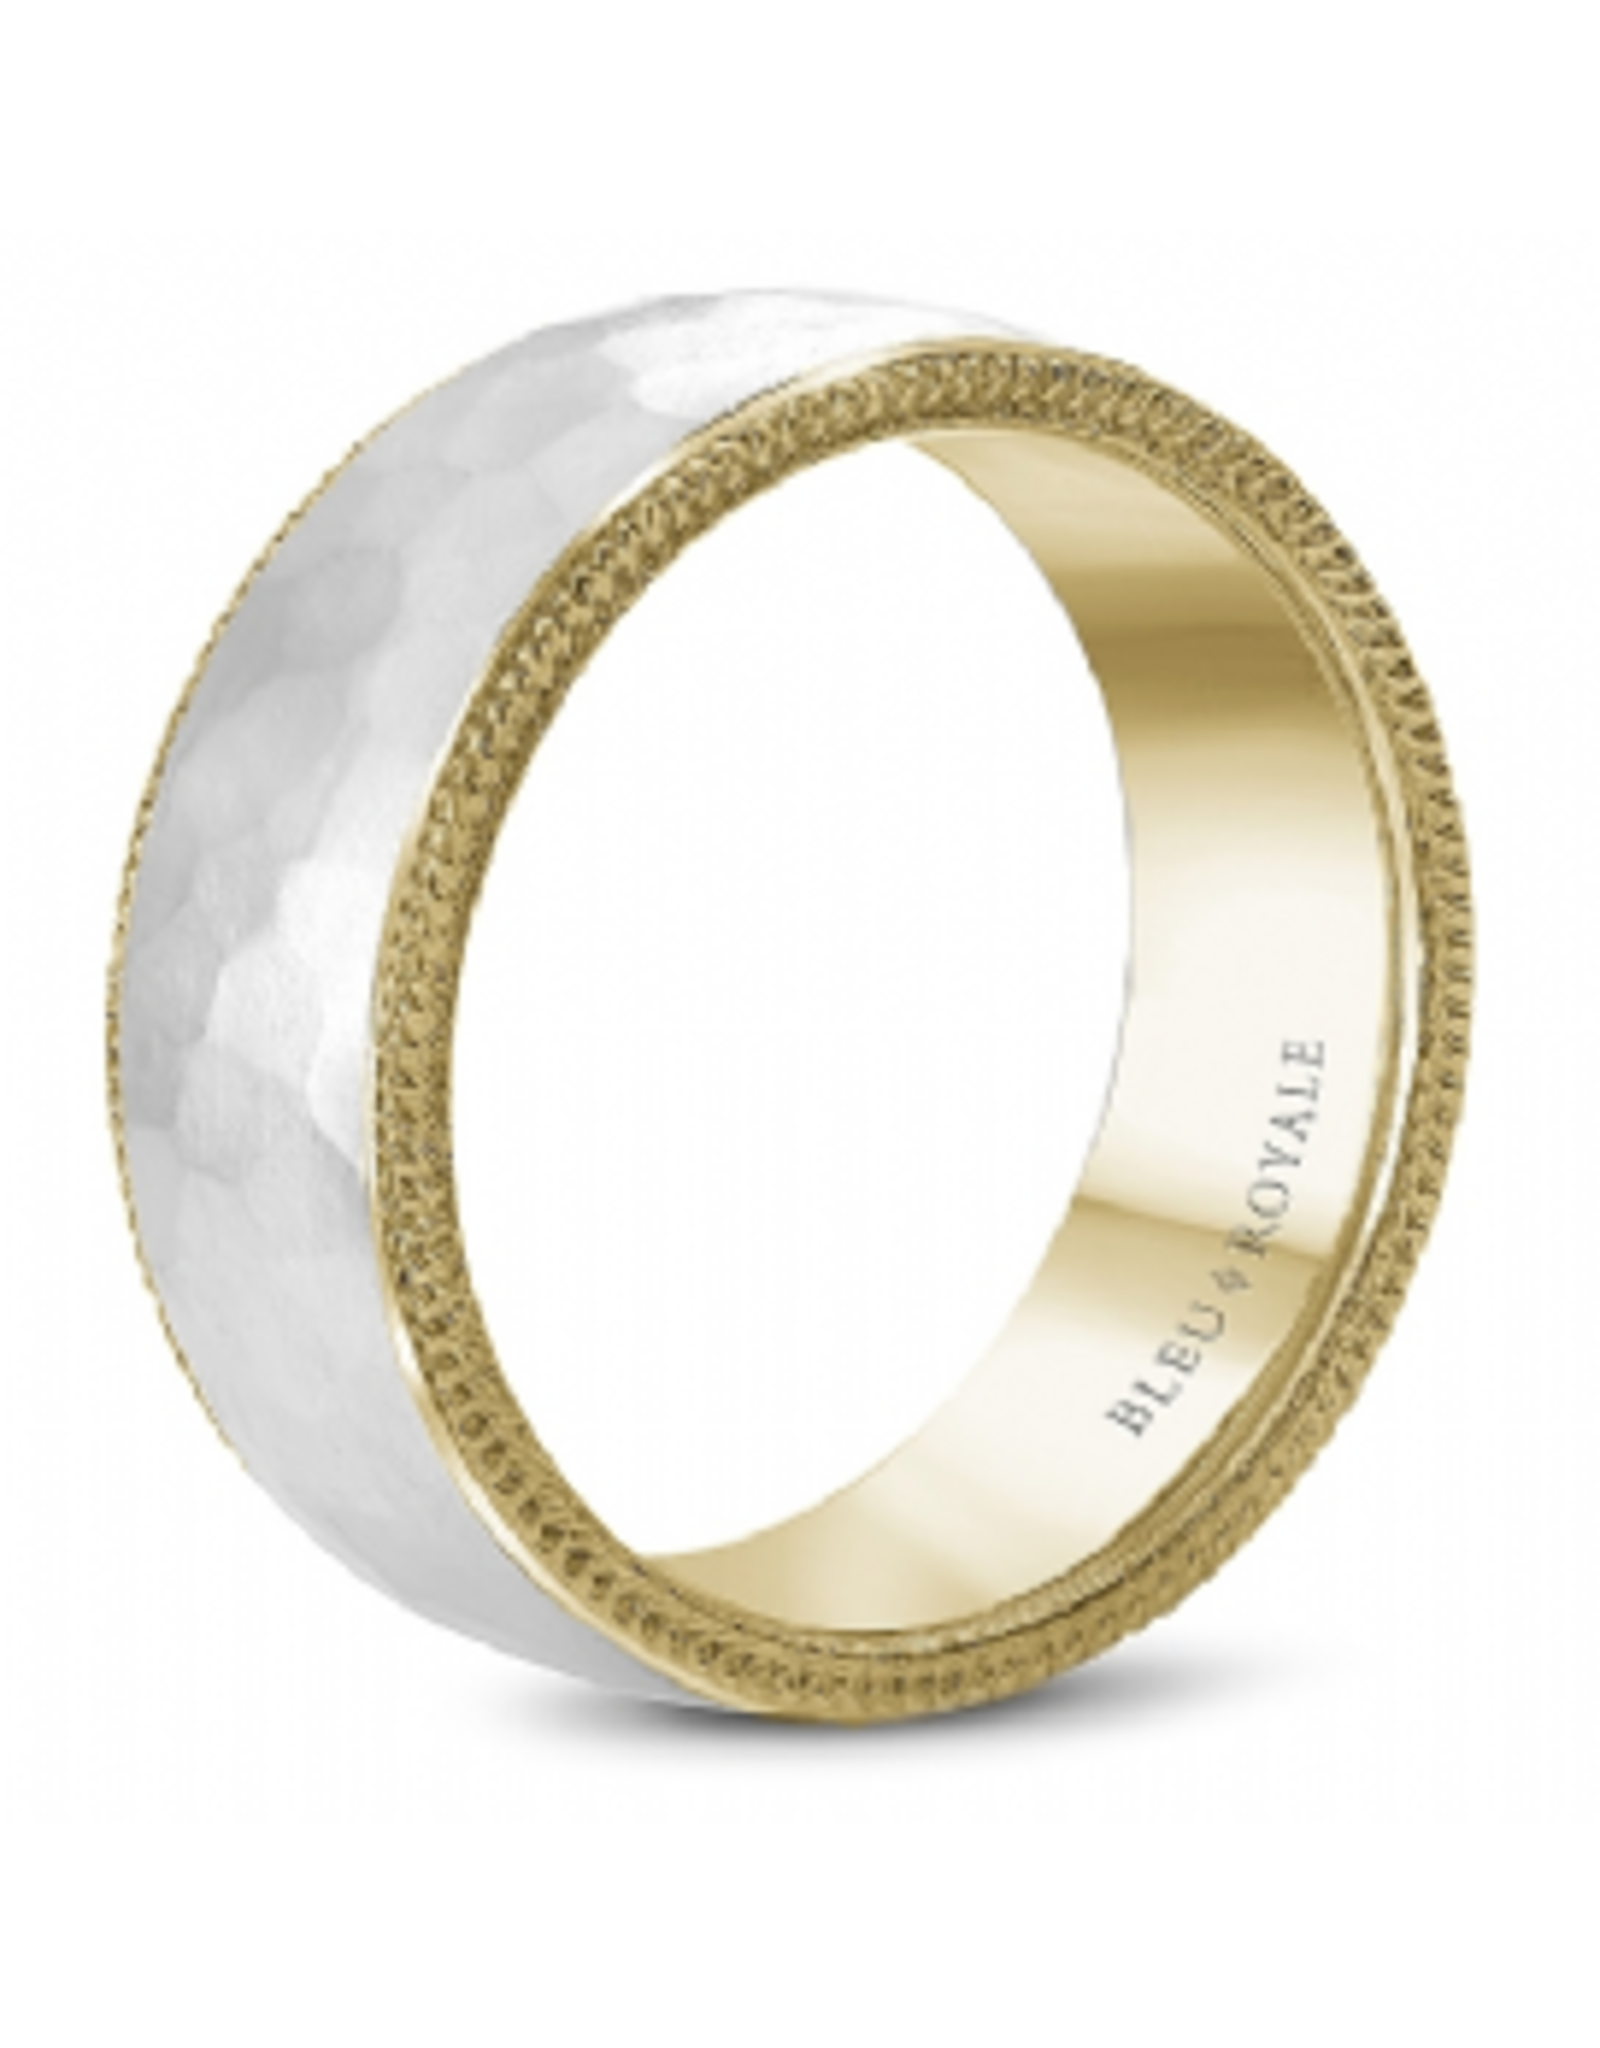 14K White & Yellow Gold Hammered Band with Milgrain Detailing - 8.5mm